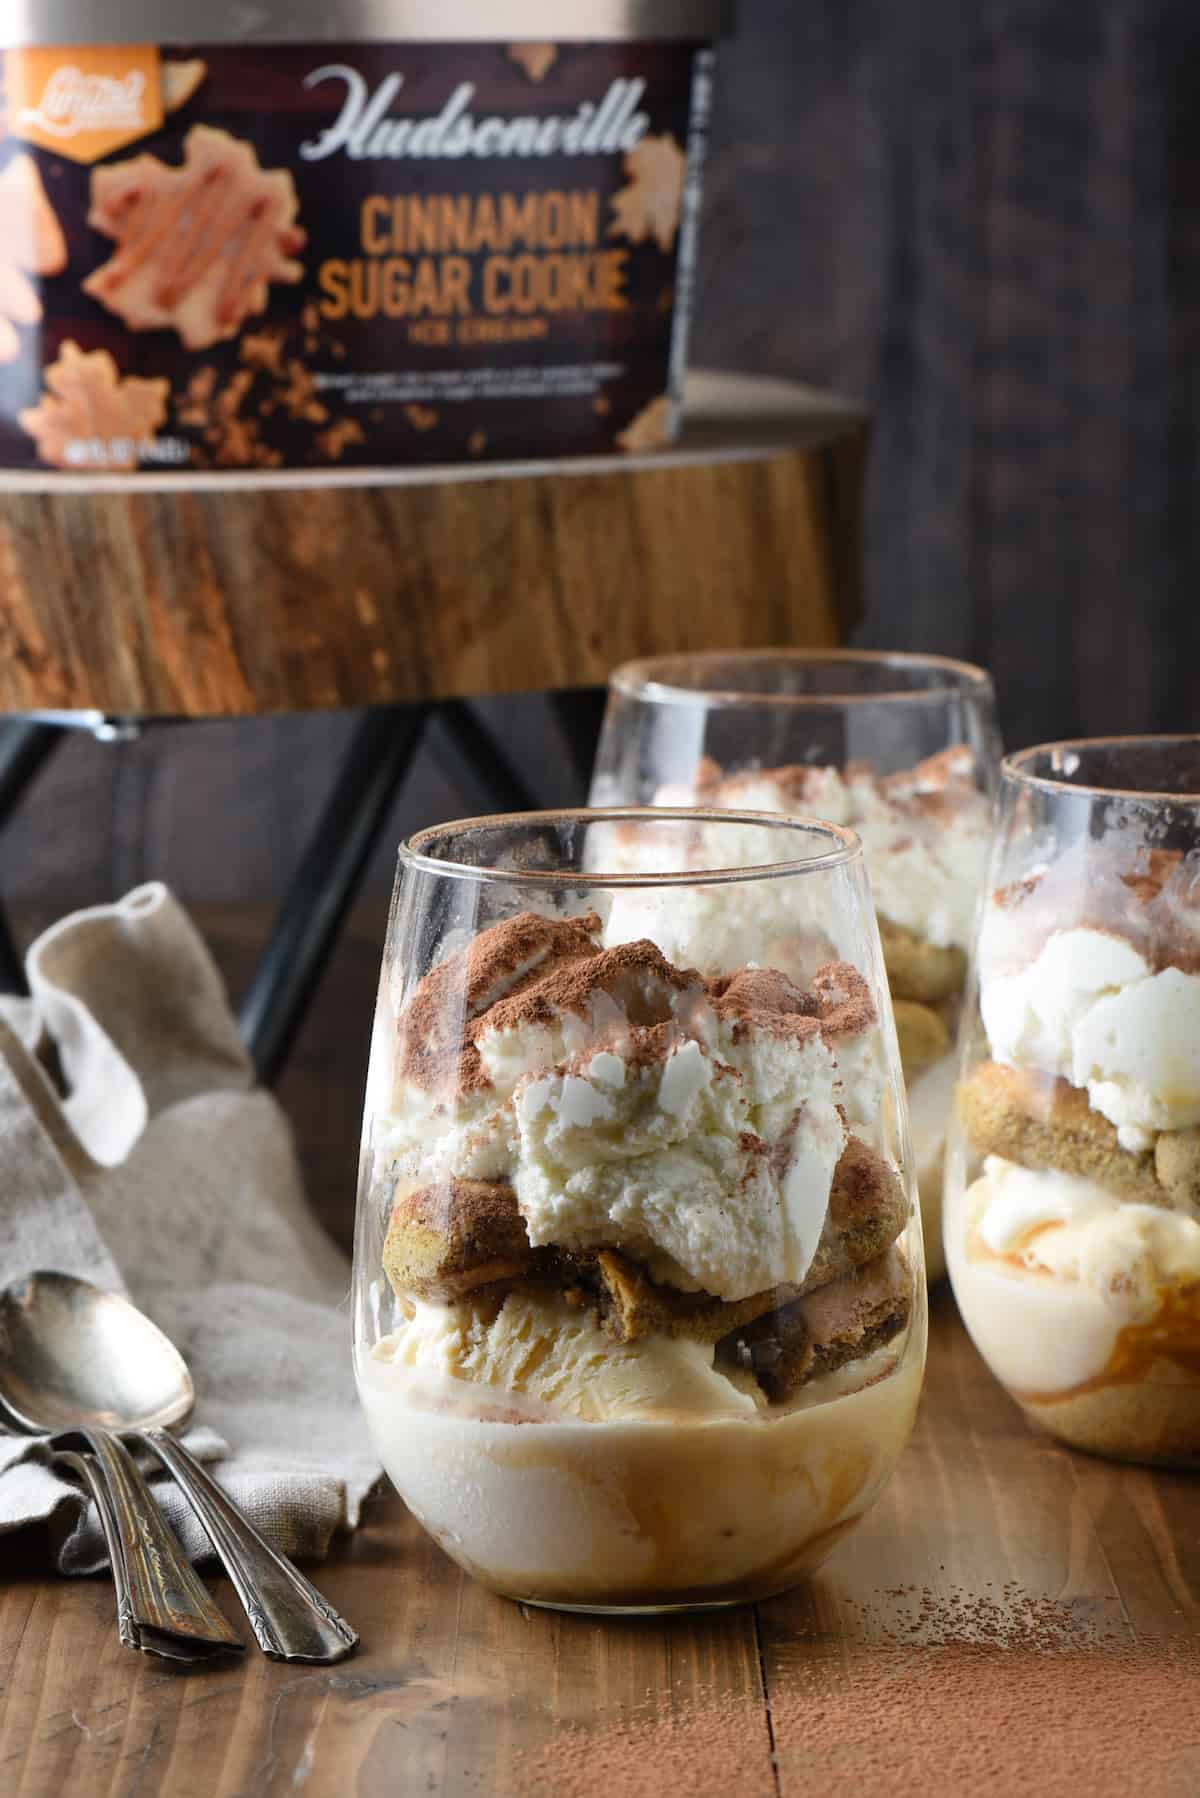 Tiramisiu trifles in stemless wine glasses, with Hudsonville Cinnamon Sugar Cookie ice cream carton on stand in background.